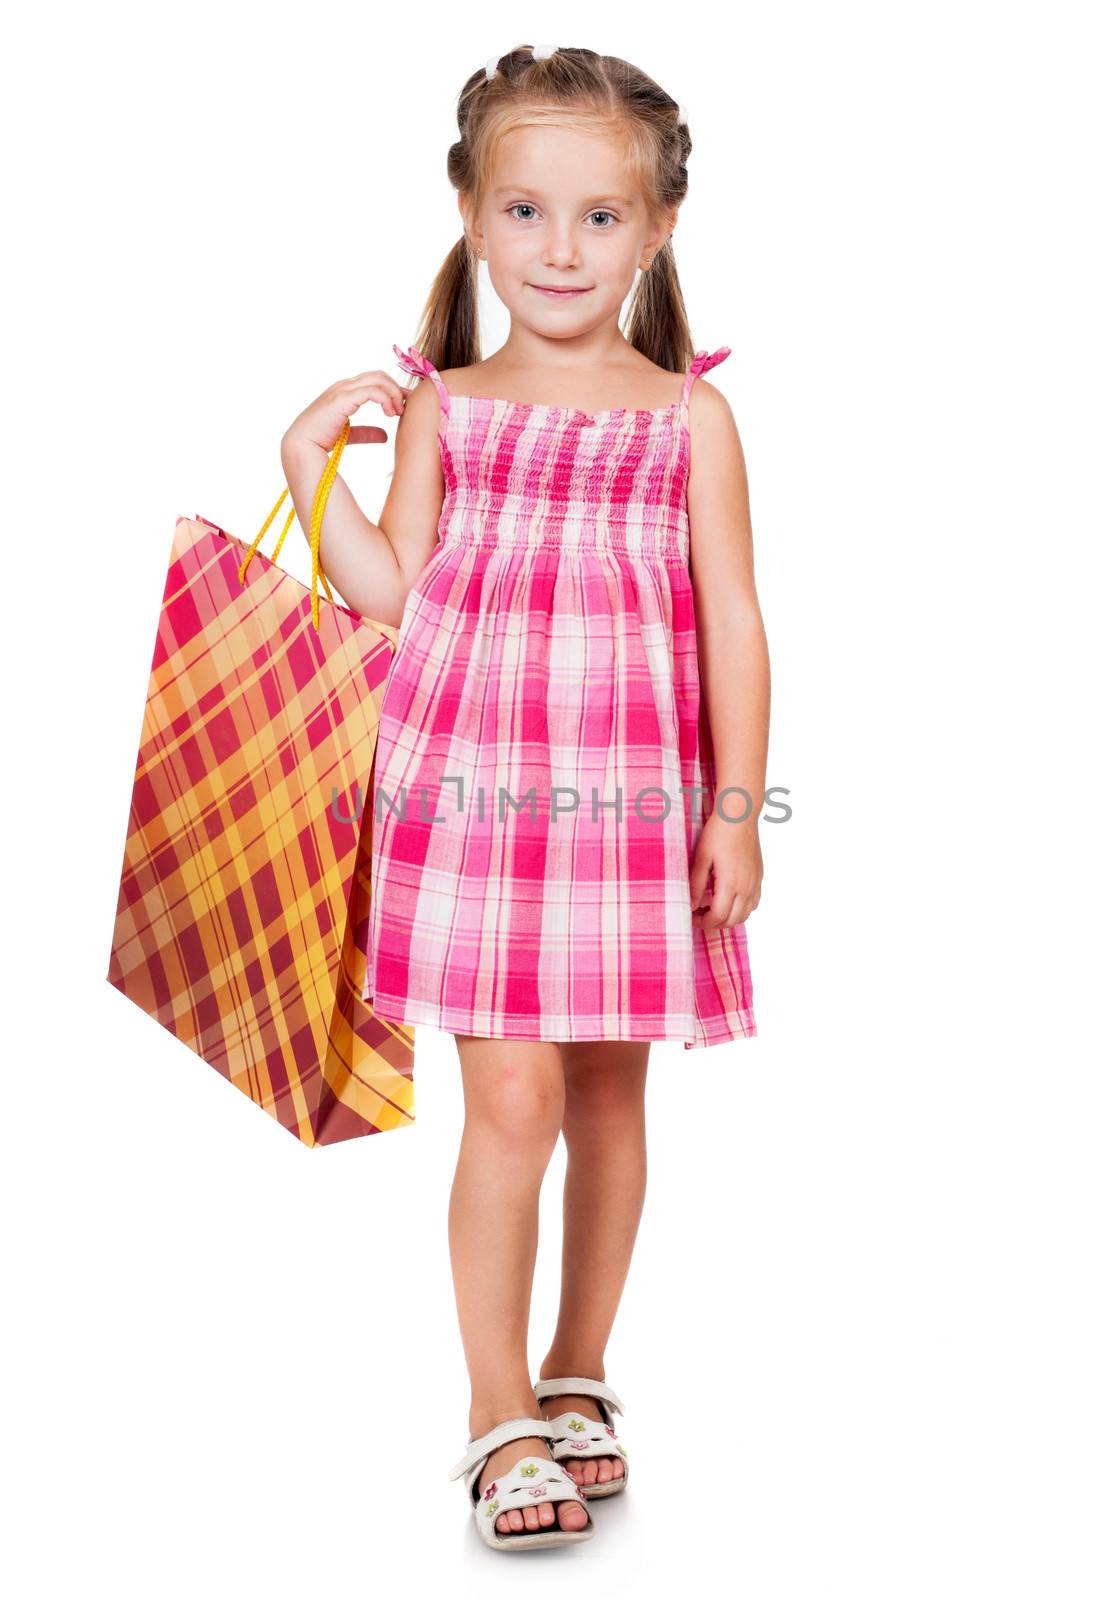 cute little girl with shopping bag isolated on white background